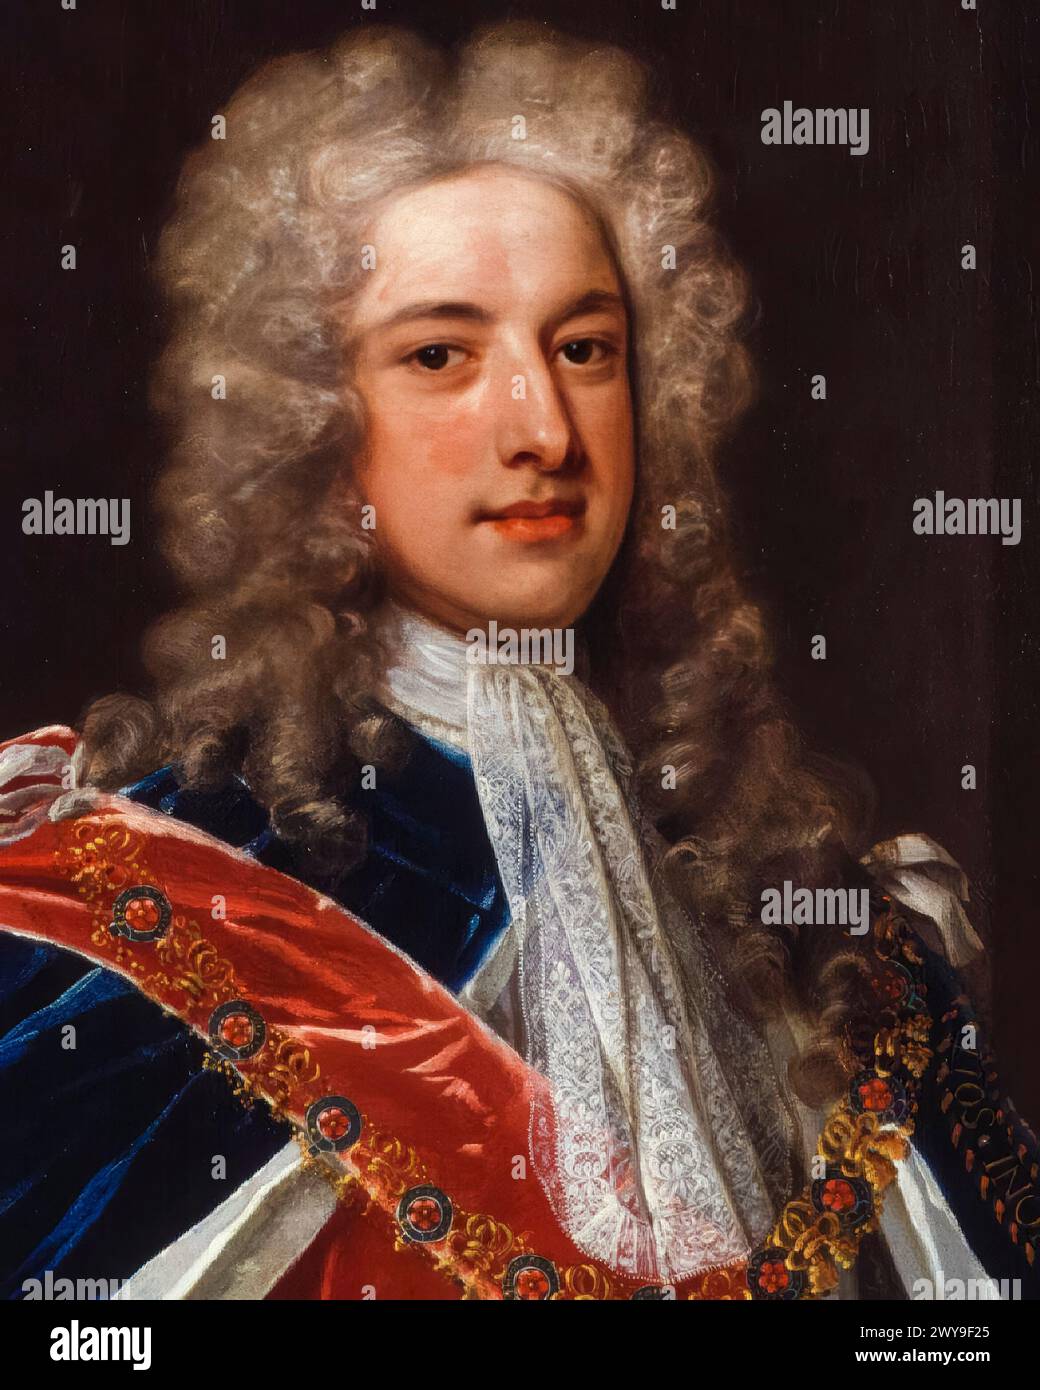 Thomas Pelham-Holles, 1st Duke of Newcastle upon Tyne (1693-1768), Whig politician and Prime Minister of Great Britain twice from 1754-1756 and 1757-1762, portrait painting in oil on canvas by Charles Jervas (attributed), circa 1721 Stock Photo